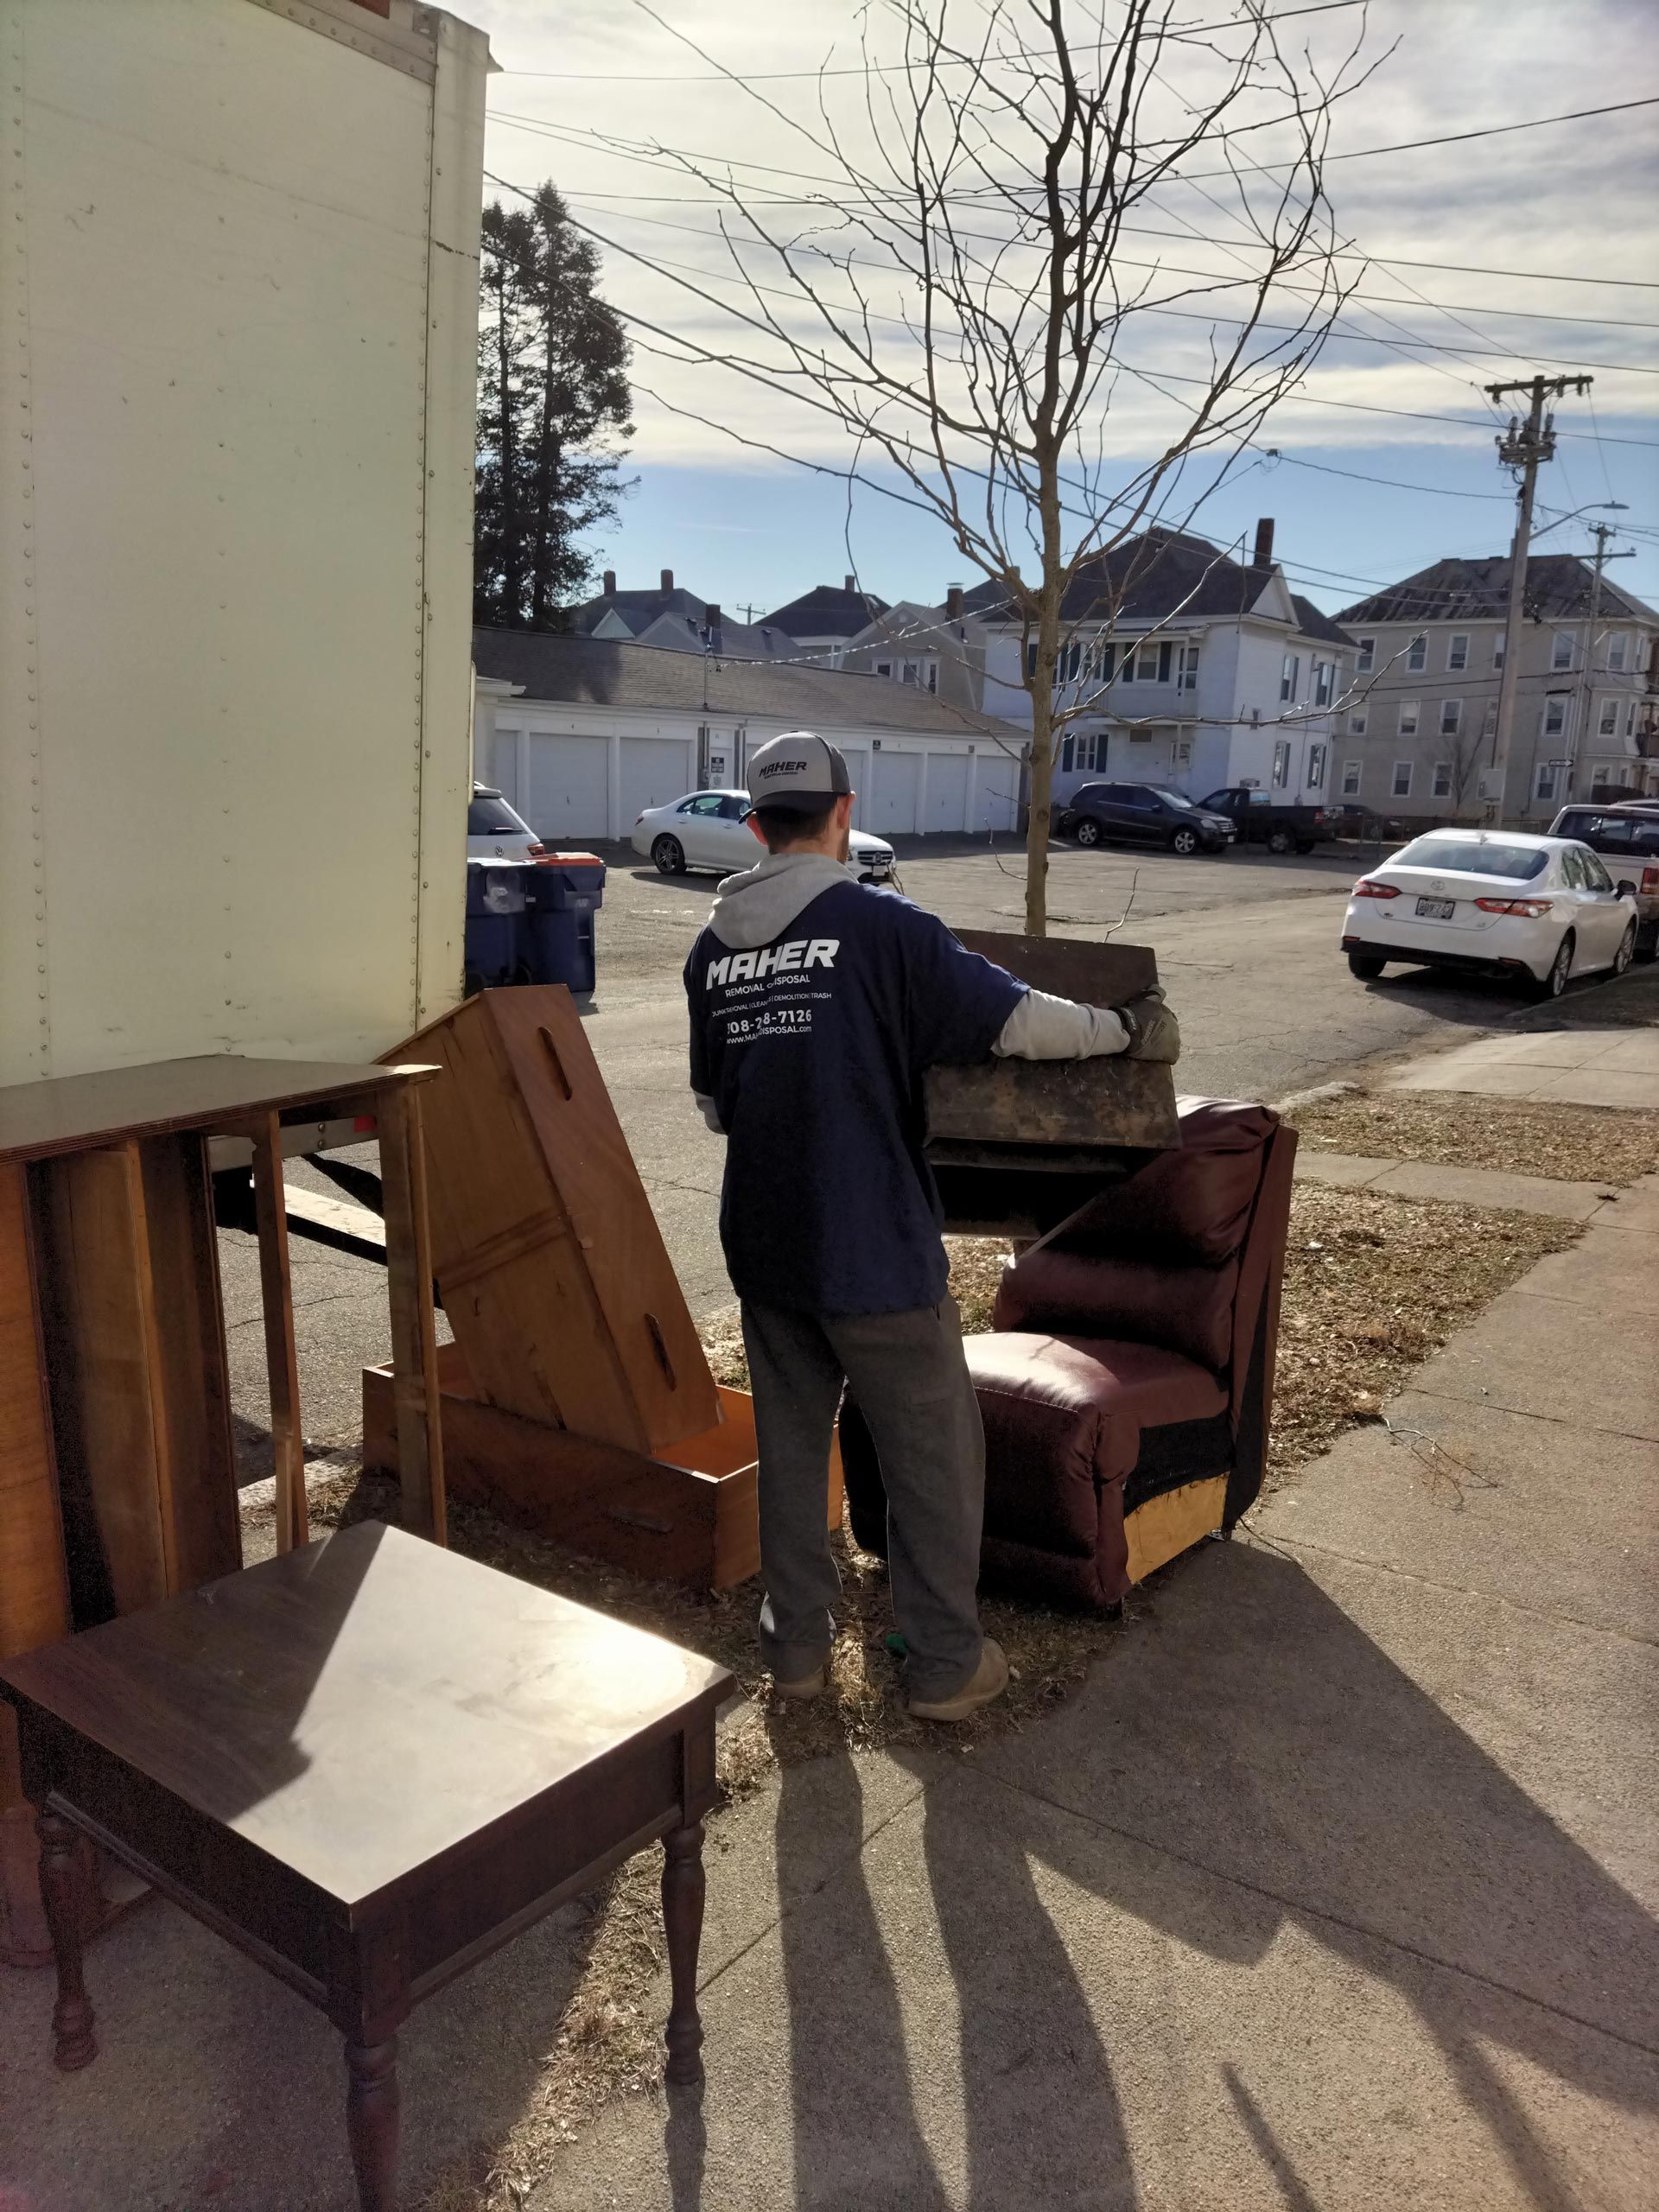 Maher Removal & Disposal offers furniture removal services to residents and commercial businesses.